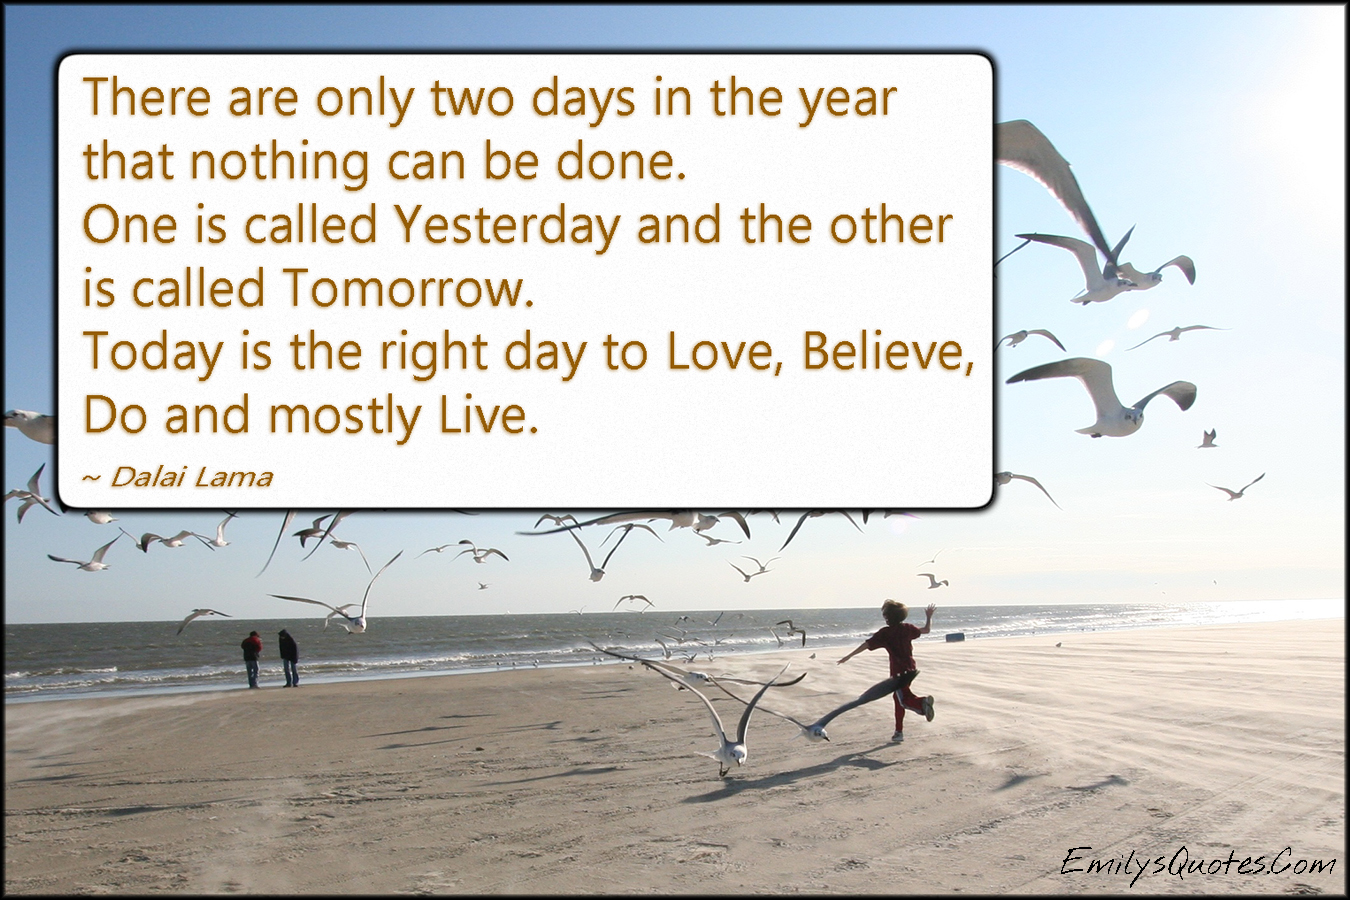 There are only two days in the year that nothing can be done. One is called Yesterday and the other is called Tomorrow. Today is the right day to Love, Believe, Do and mostly Live